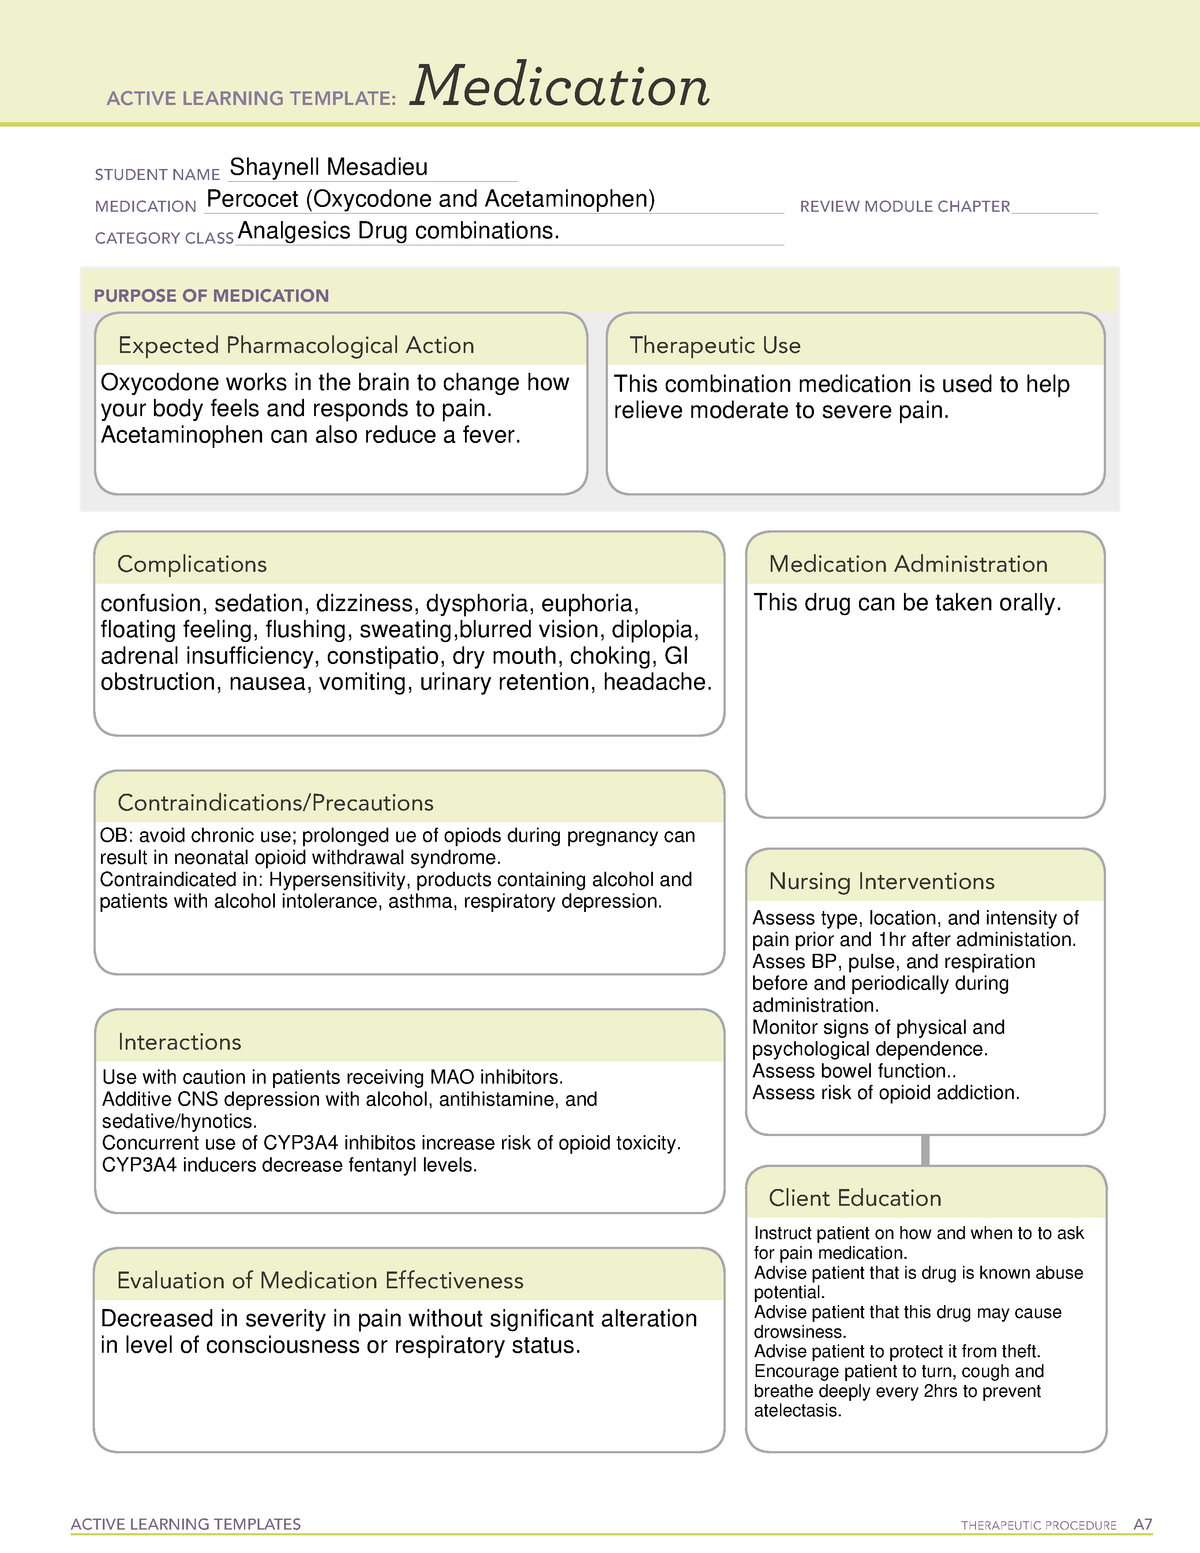 ati-learning-template-percocet-clinical-active-learning-templates